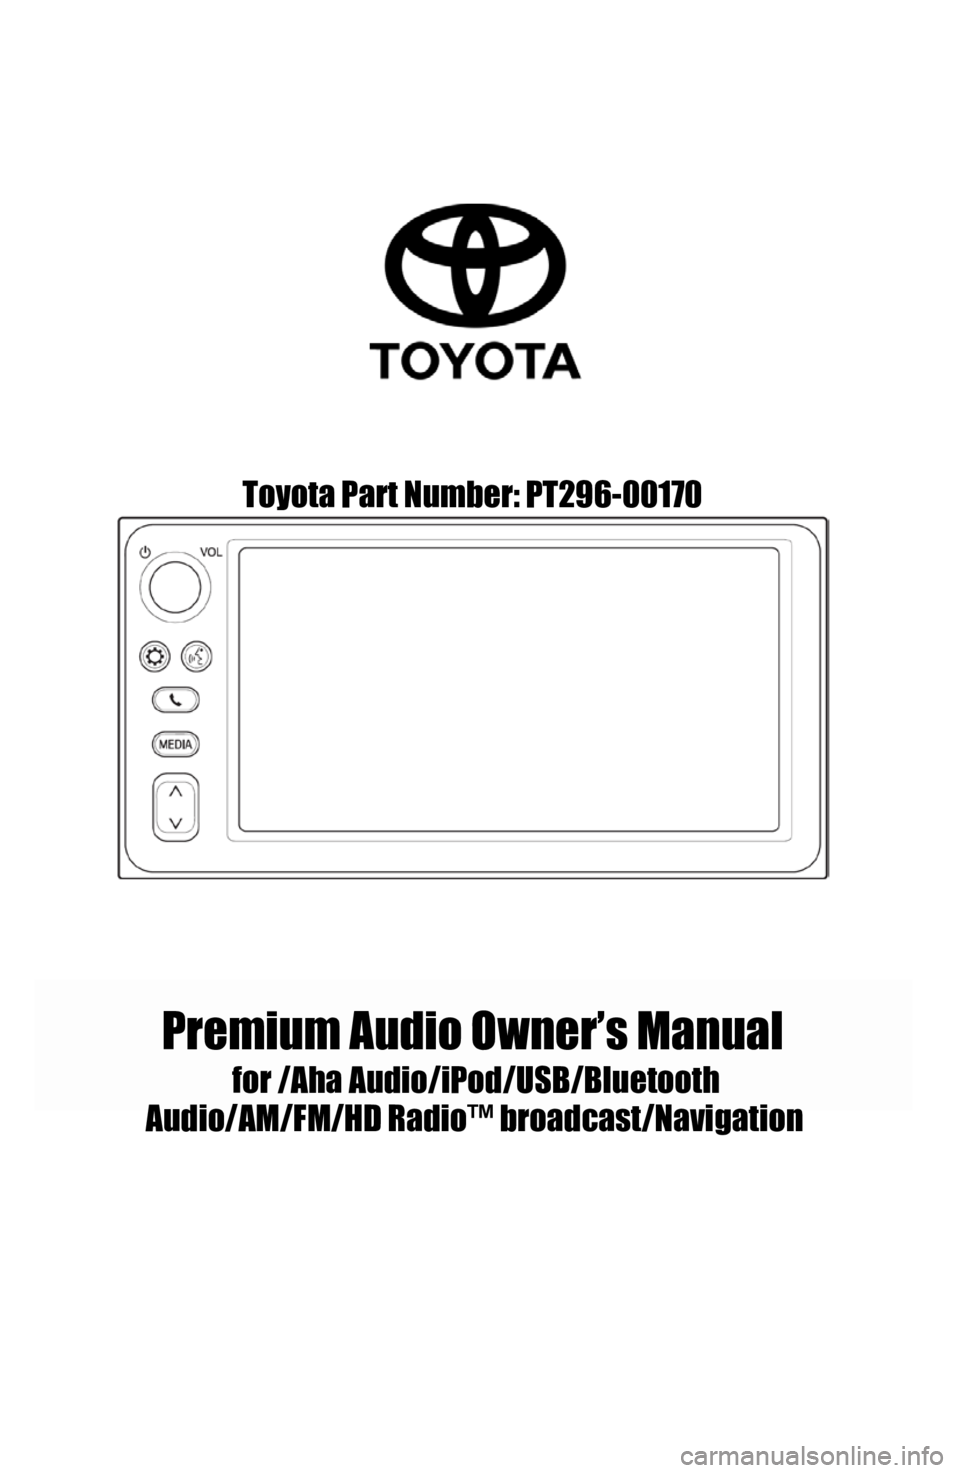 TOYOTA GT86 2018  Accessories, Audio & Navigation (in English) Toyota Part Number: PT296-00170
Premium Audio Owner’s Manual
for /AhaAudio/iPod/USB/Bluetooth 
Audio /AM/F M/HD Radio™ broadcast/Navigatio n 